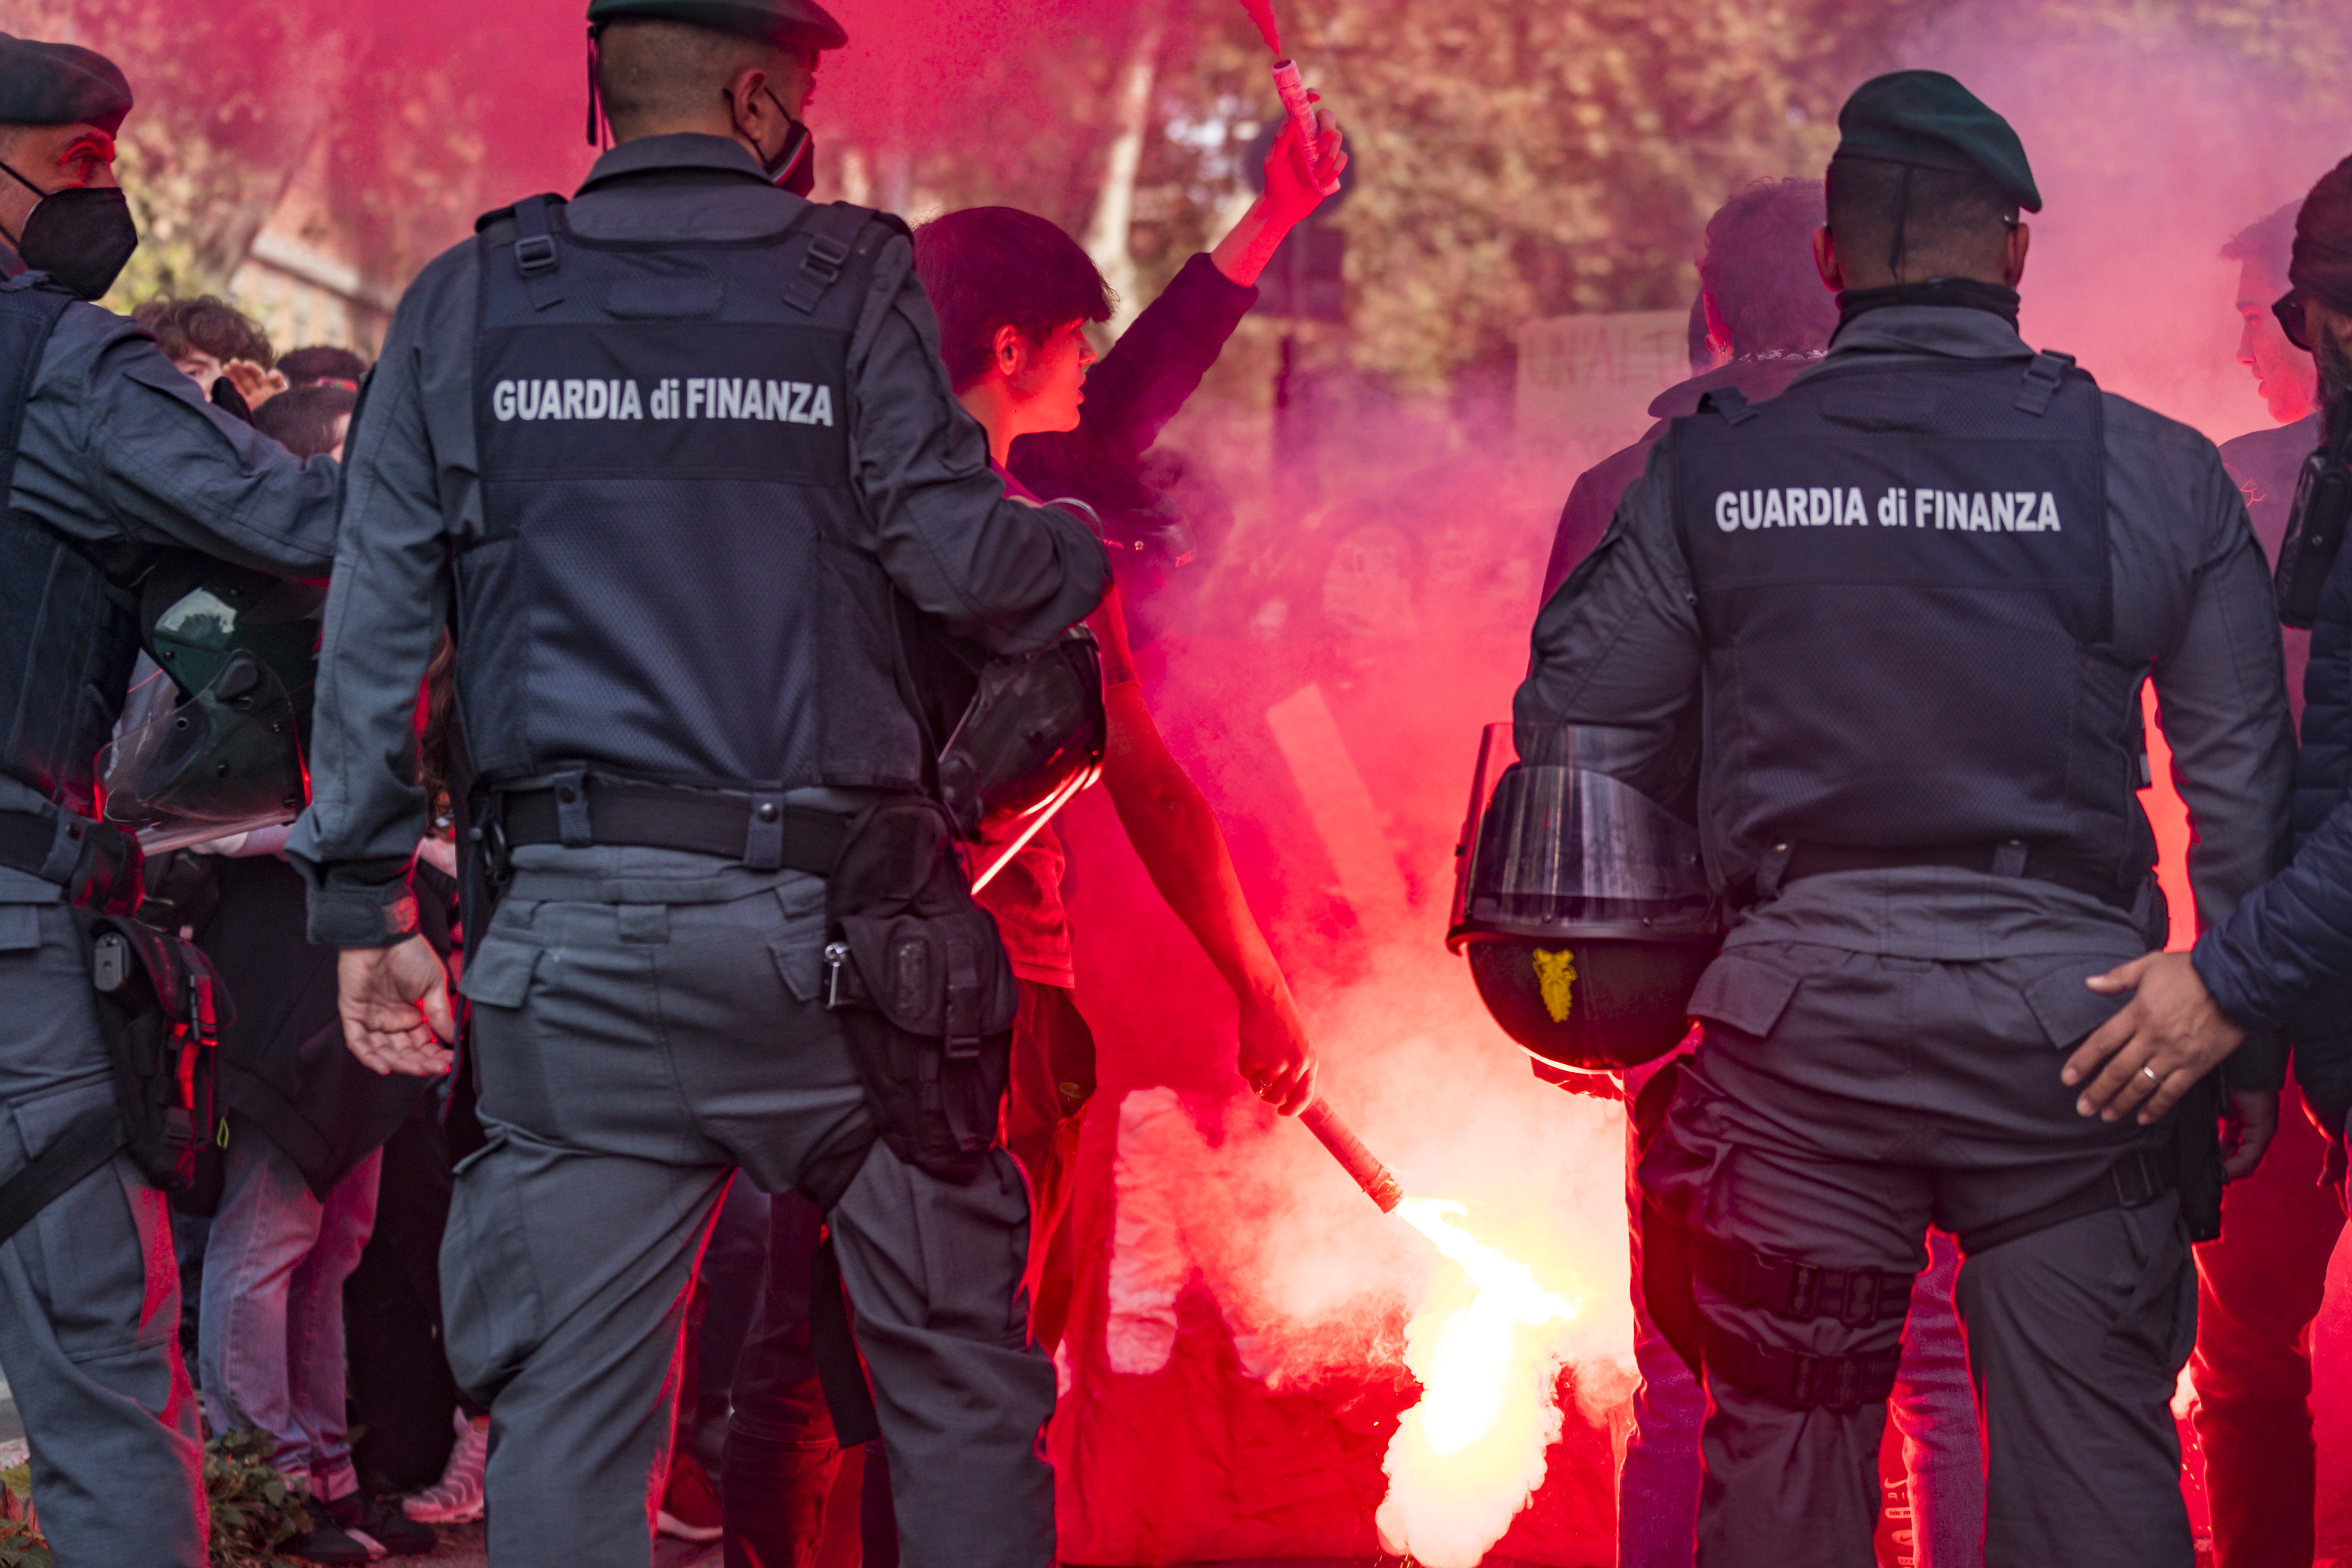 A protester holds a flare in front of the police during a demonstration in Rome during the G20 summit Friday, October 29, 2021.  